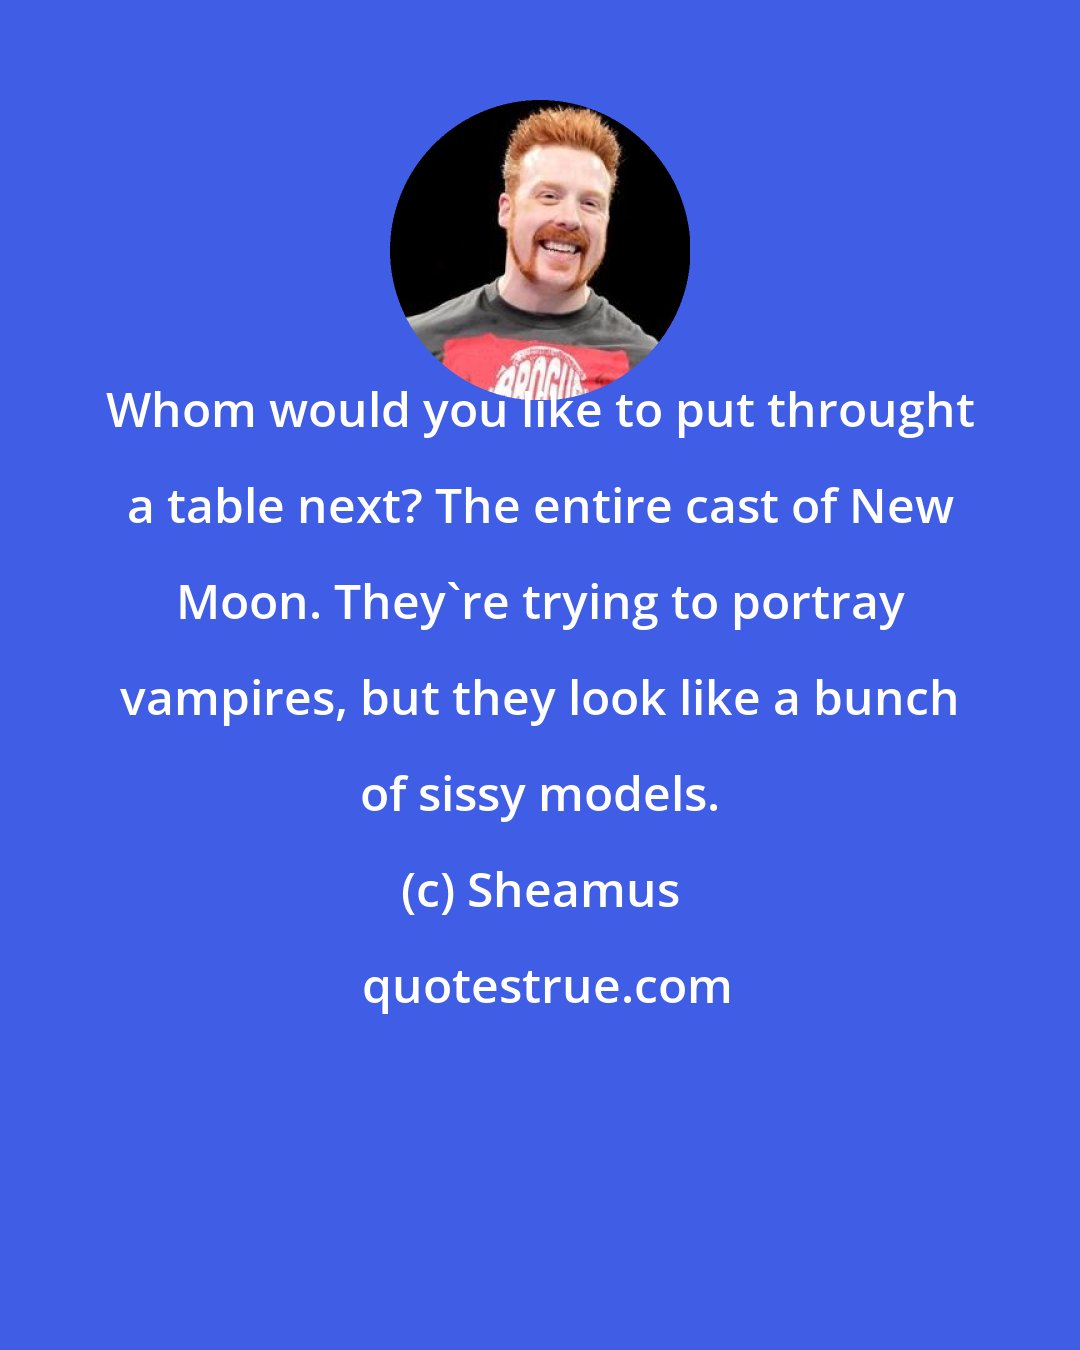 Sheamus: Whom would you like to put throught a table next? The entire cast of New Moon. They're trying to portray vampires, but they look like a bunch of sissy models.